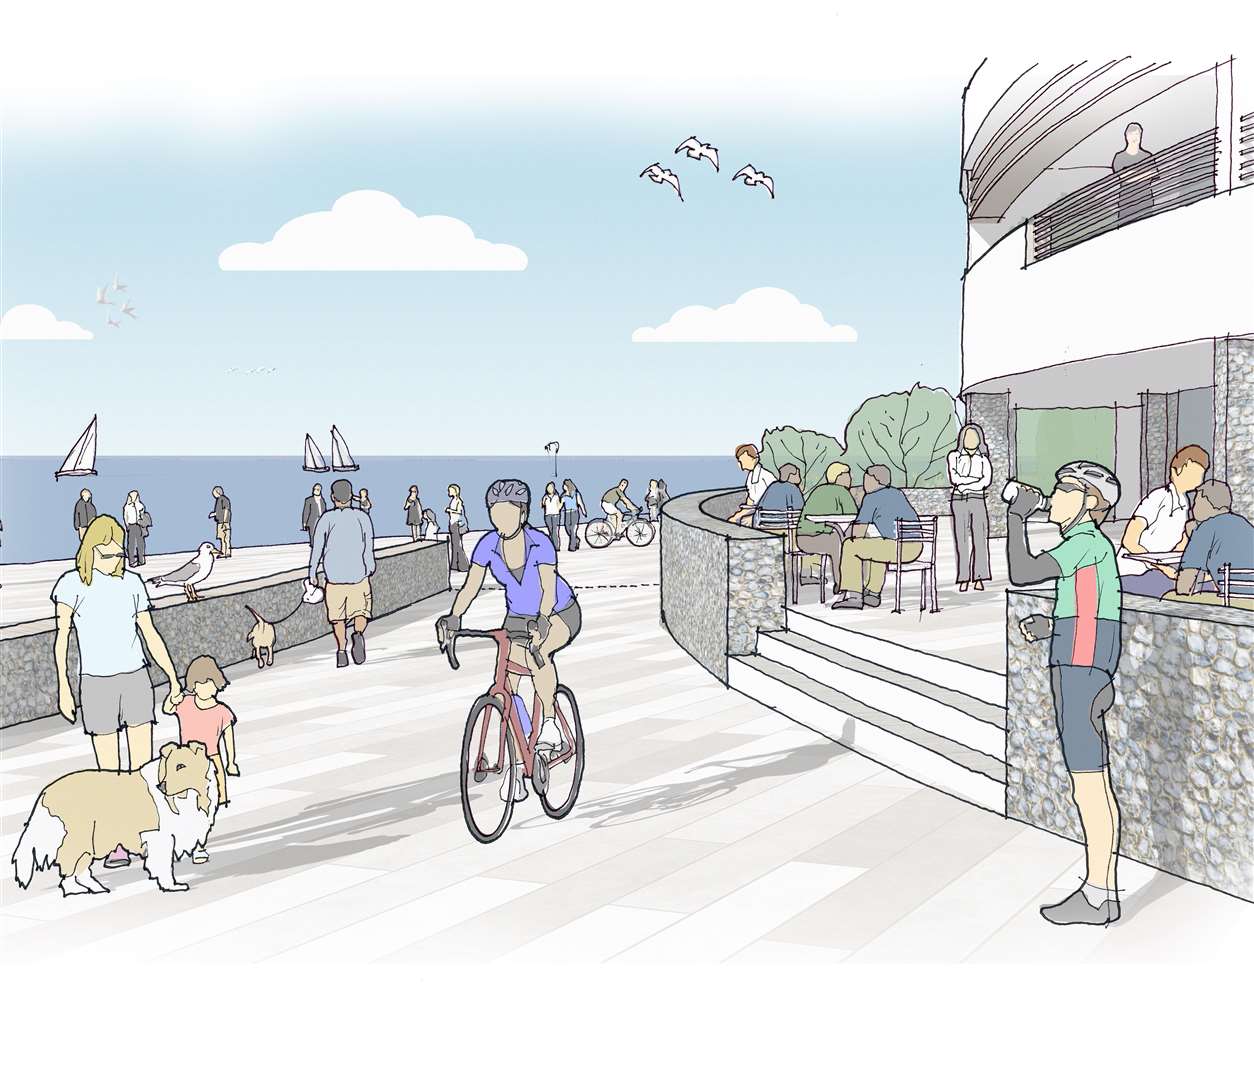 Images released last year revealed a new pedestrianised promenade where the road currently runs